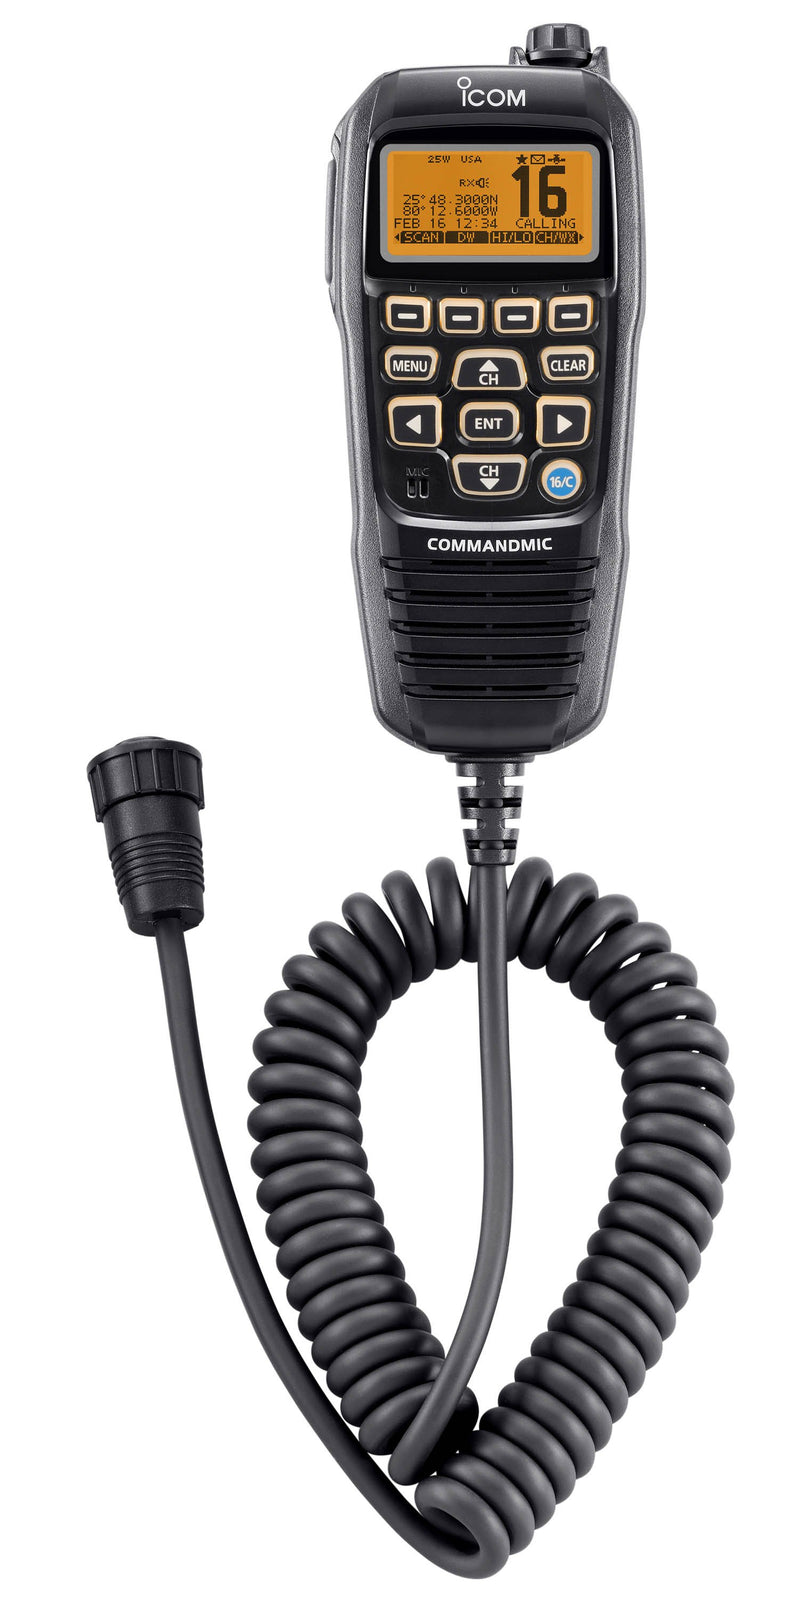 HM-195 Commandmic with cable